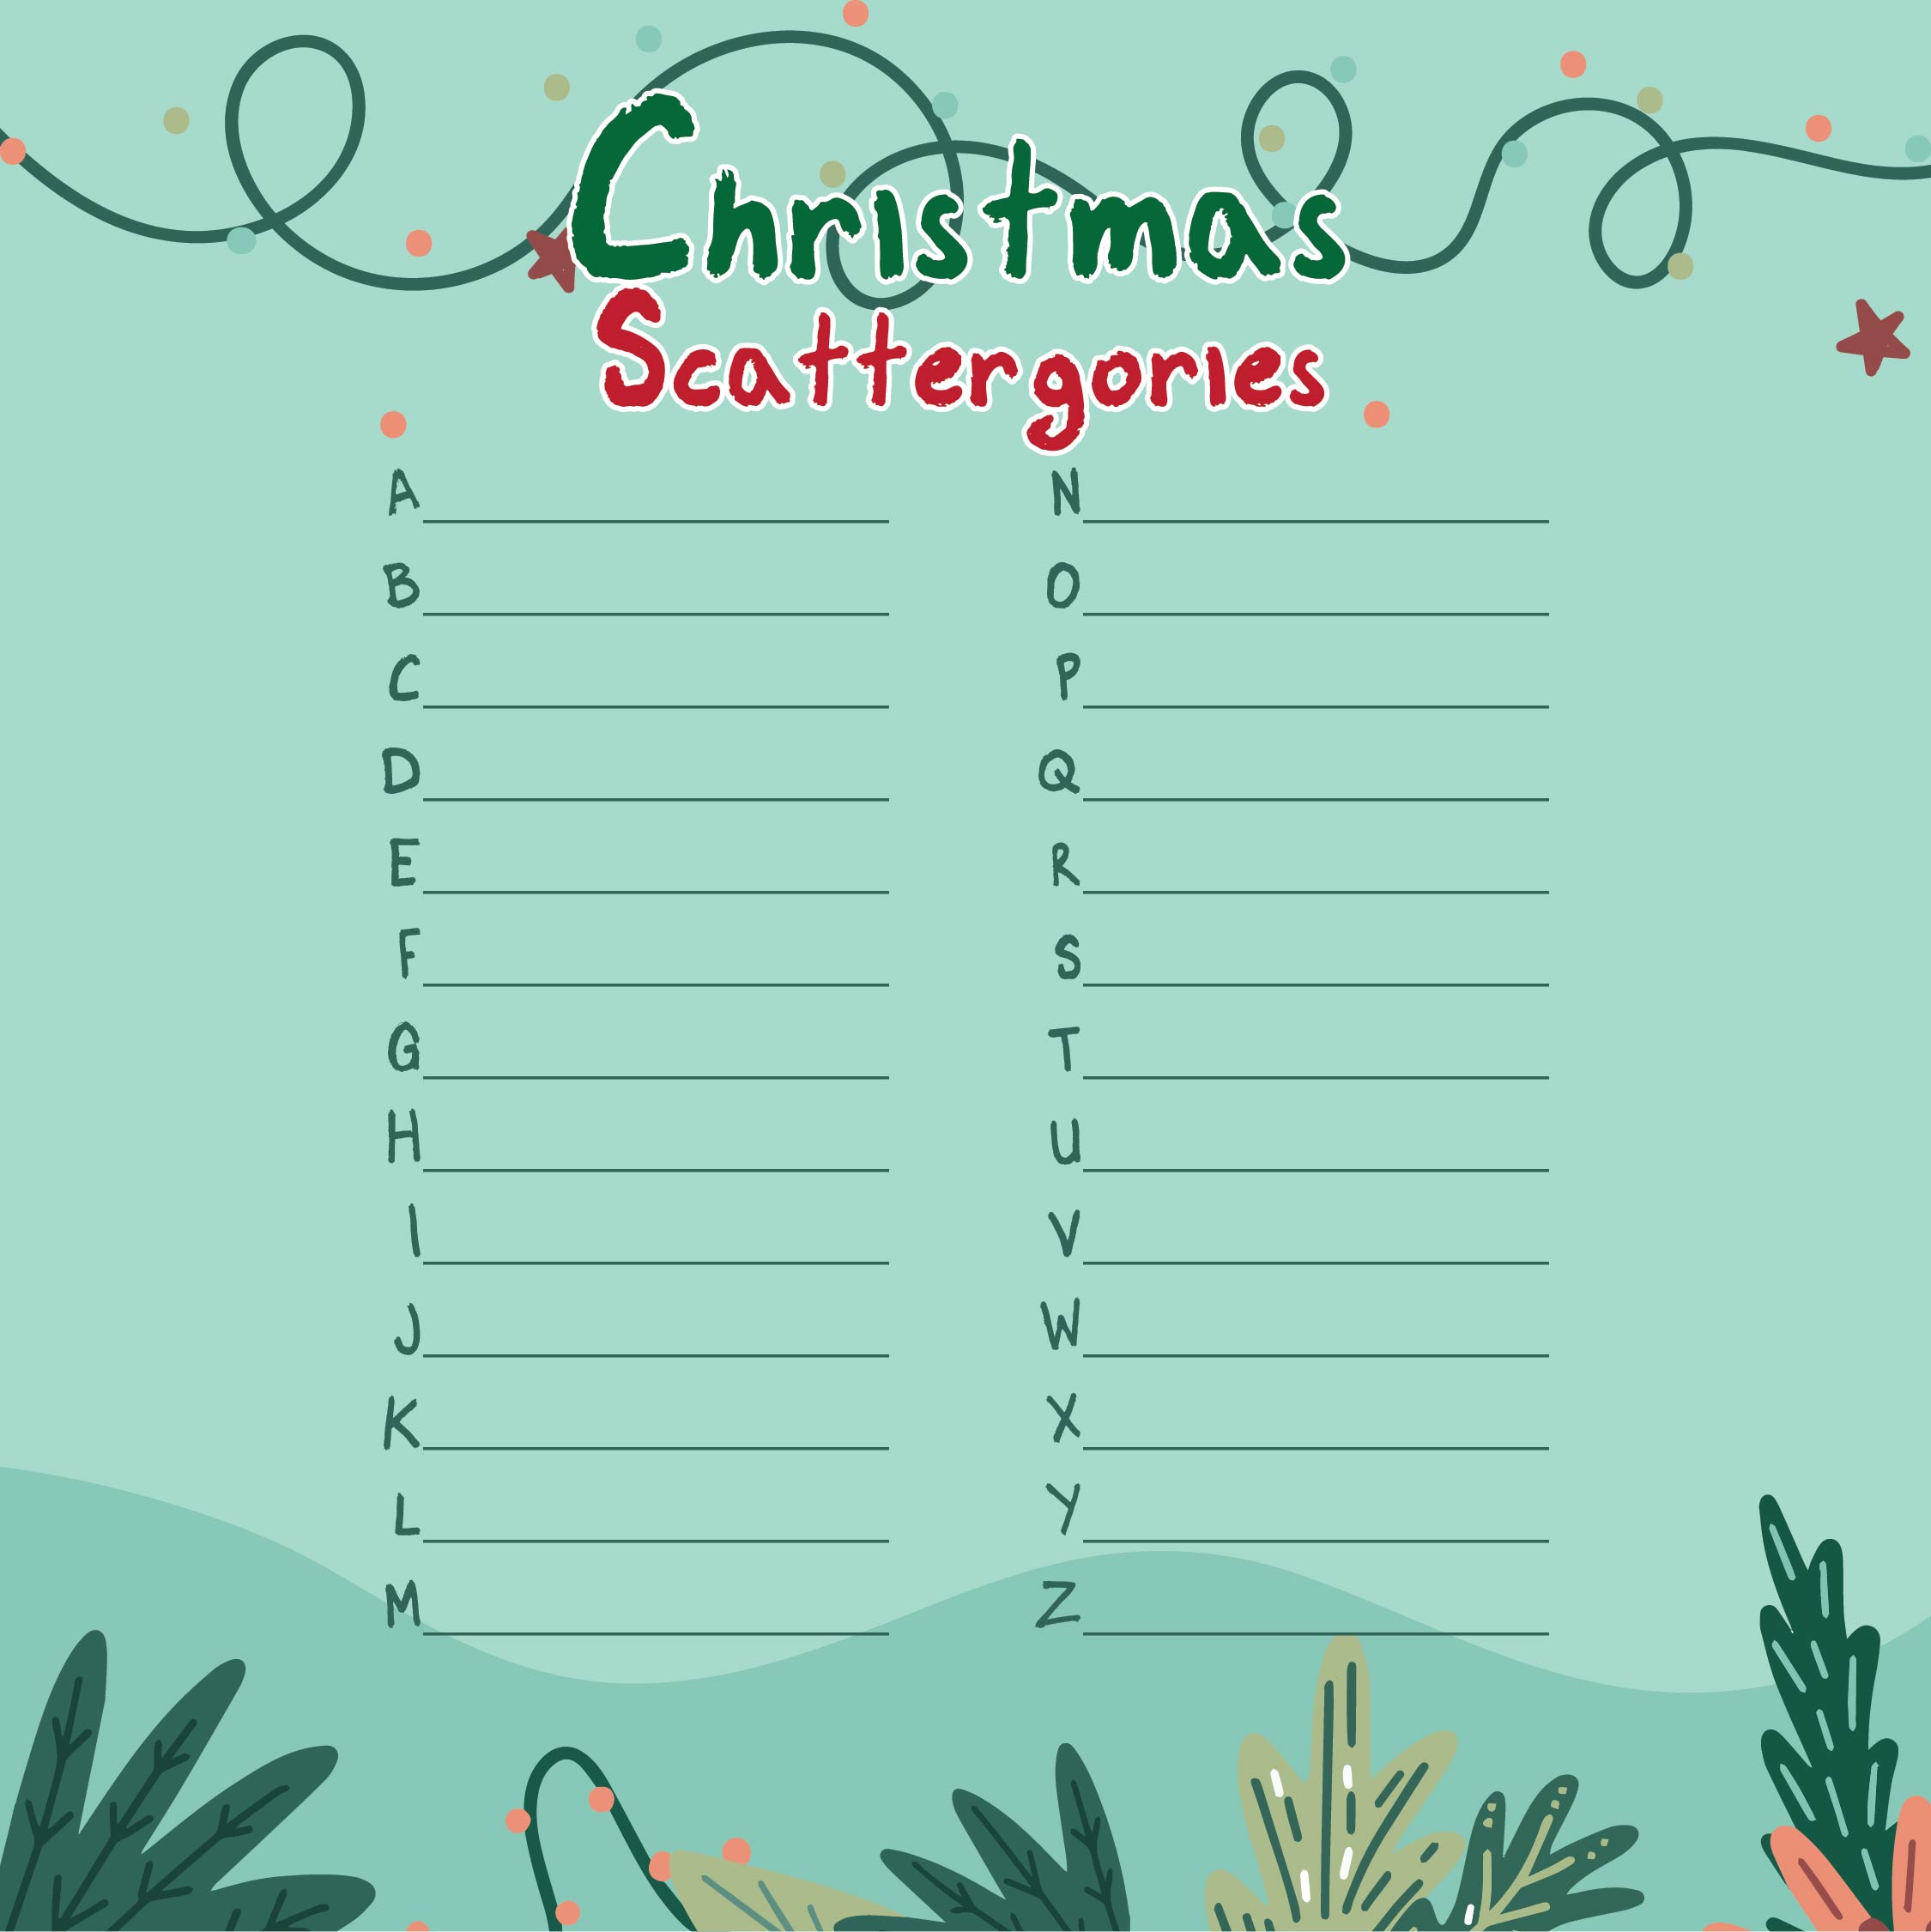 santa-s-christmas-scattergories-printable-party-game-mama-likes-this